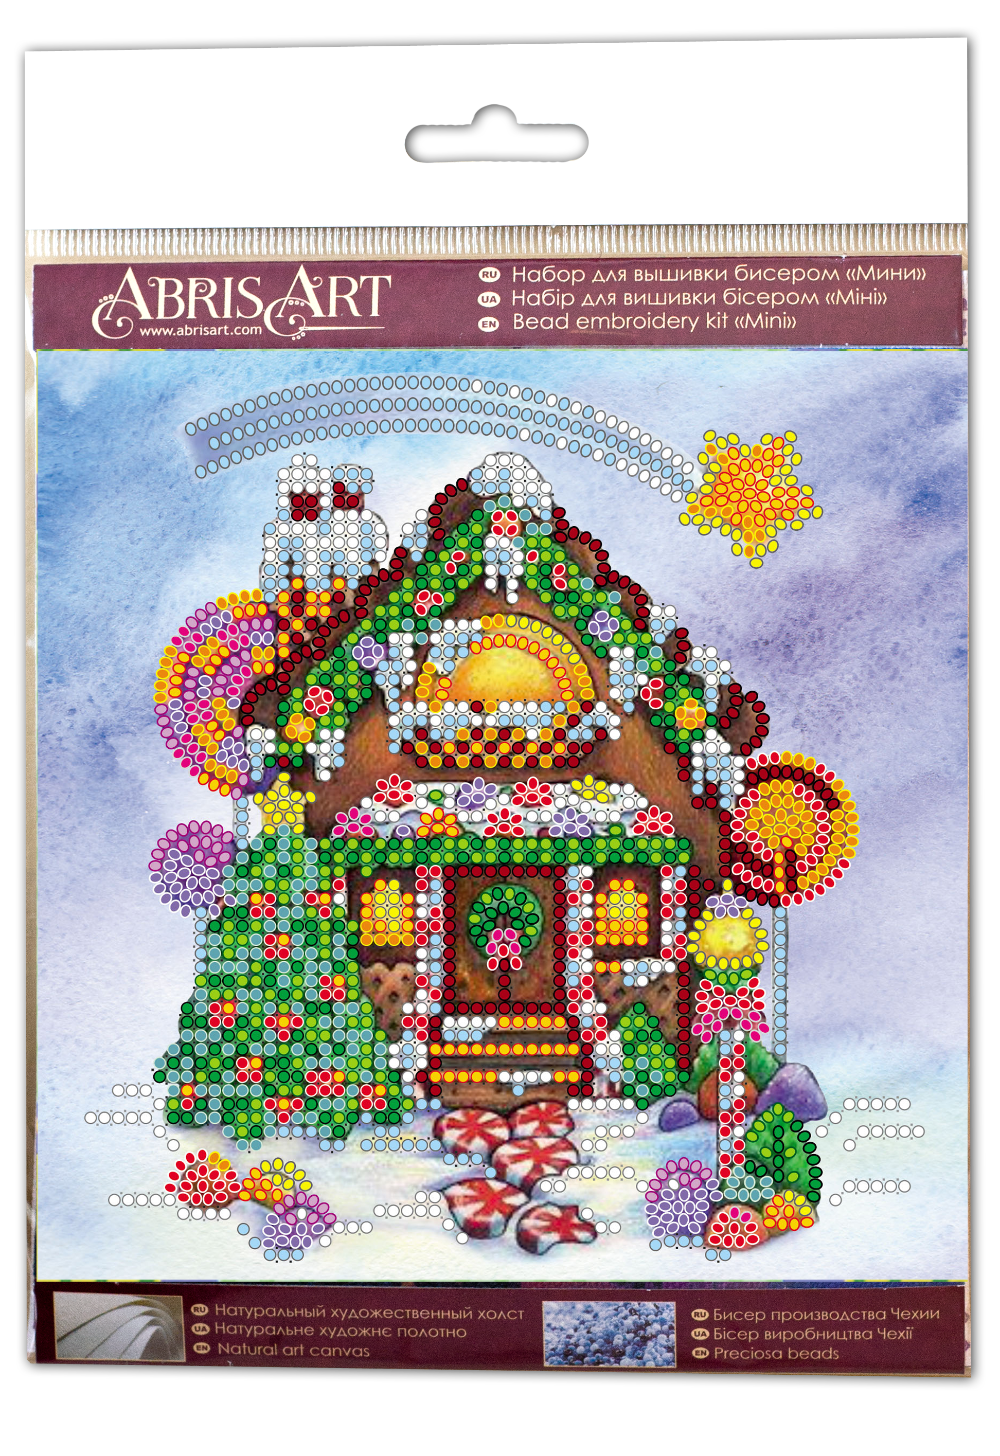 Mini Bead embroidery kit Gingerbread house Size: 5.9"×5.9" (15×15 сm)